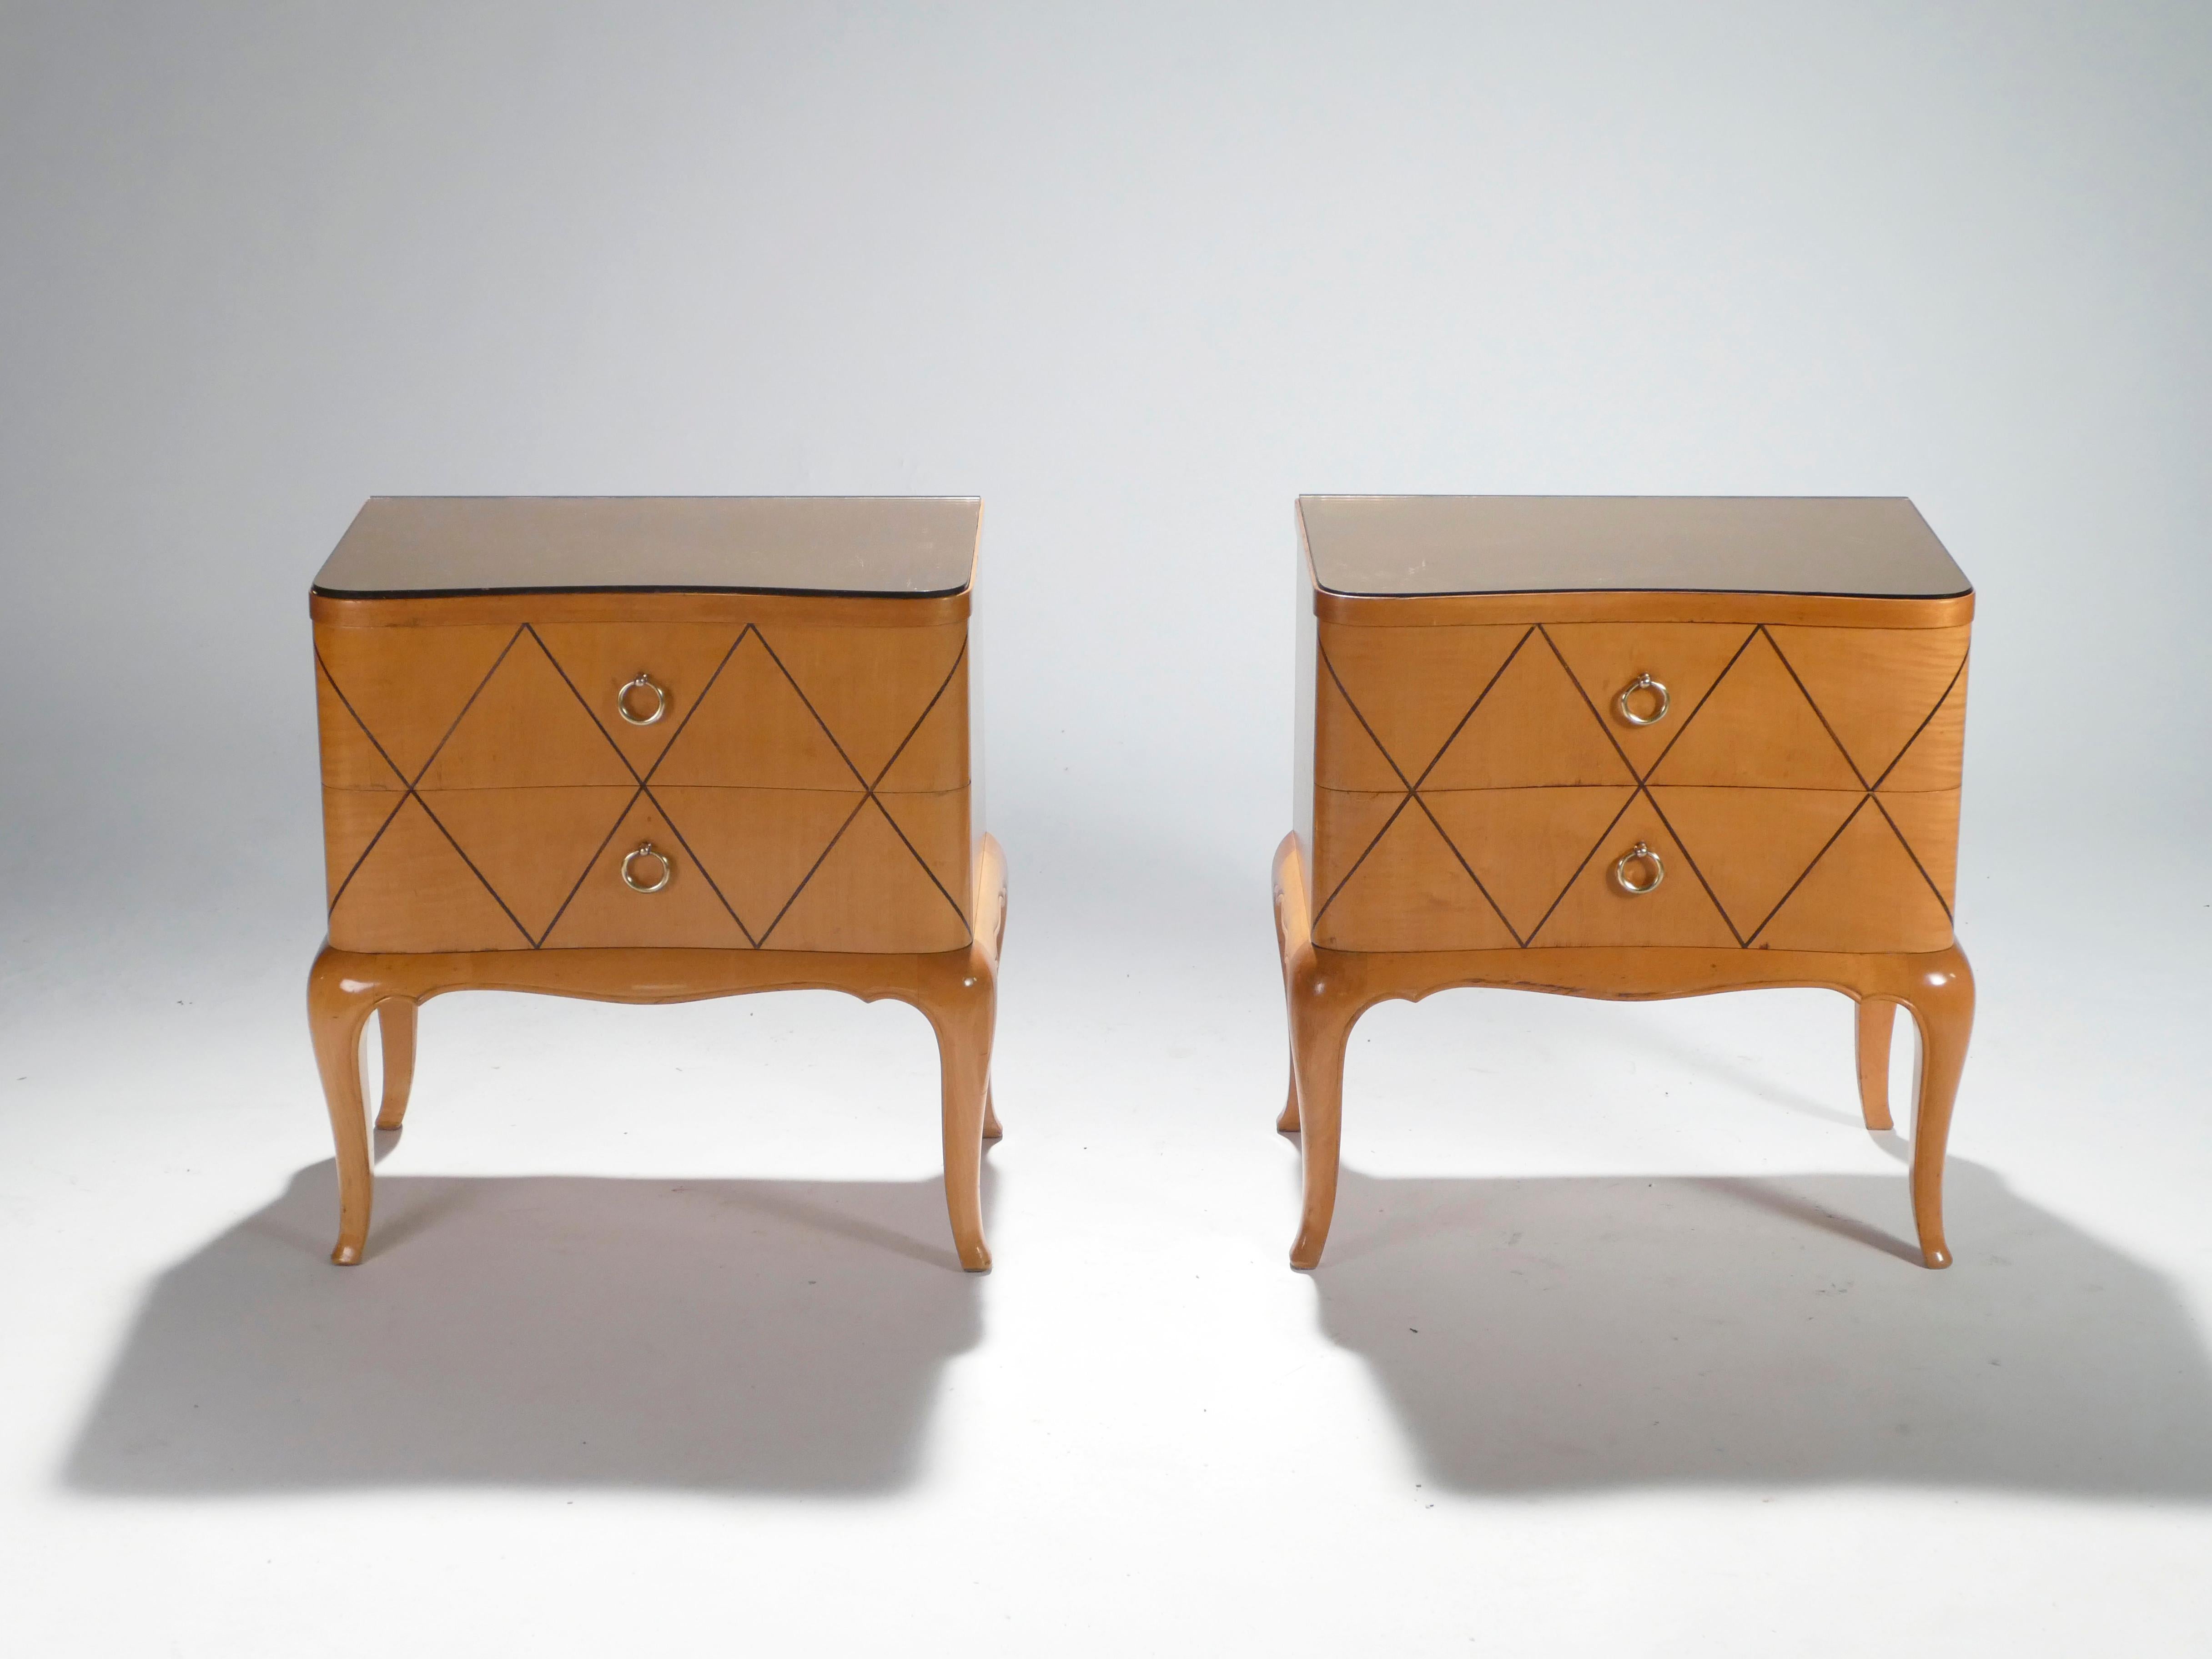 These Art Deco nightstands or side tables infuse a cozy, romantic feel into a contemporary bedroom. With a base of warm sycamore maple and a stunning mirrored bronze top, the pair is typical of twentieth century designer Rene Prou’s modernist work.